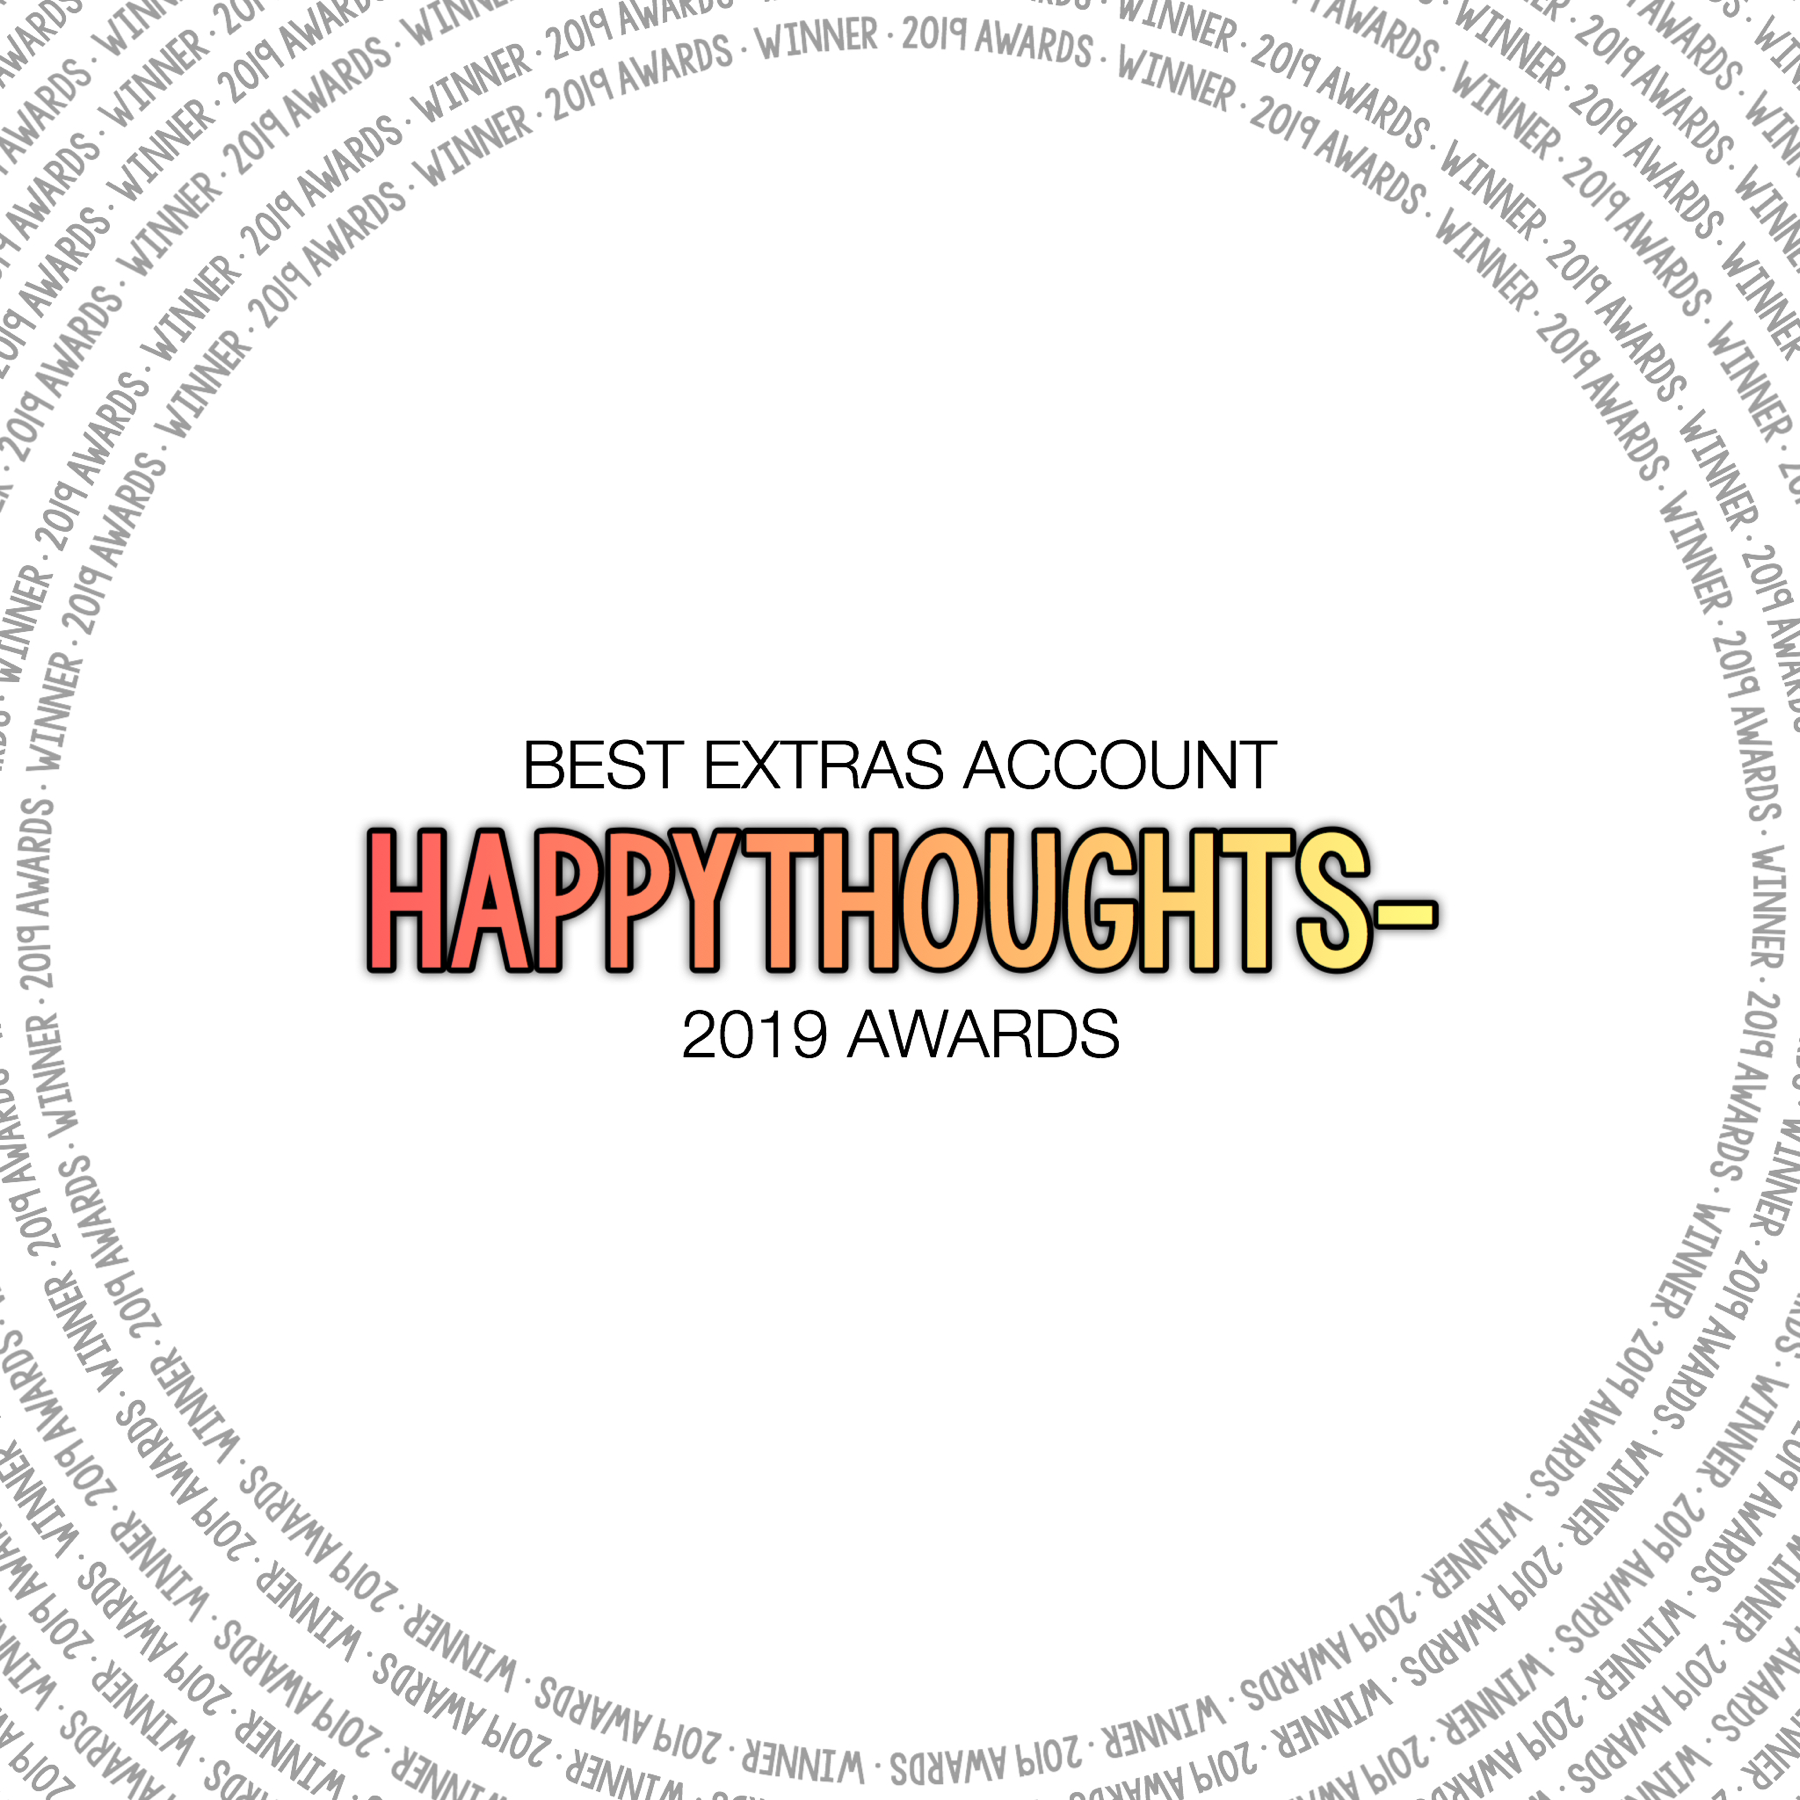 Congratulations @happythoughts-!

The vote count will be in the remixes